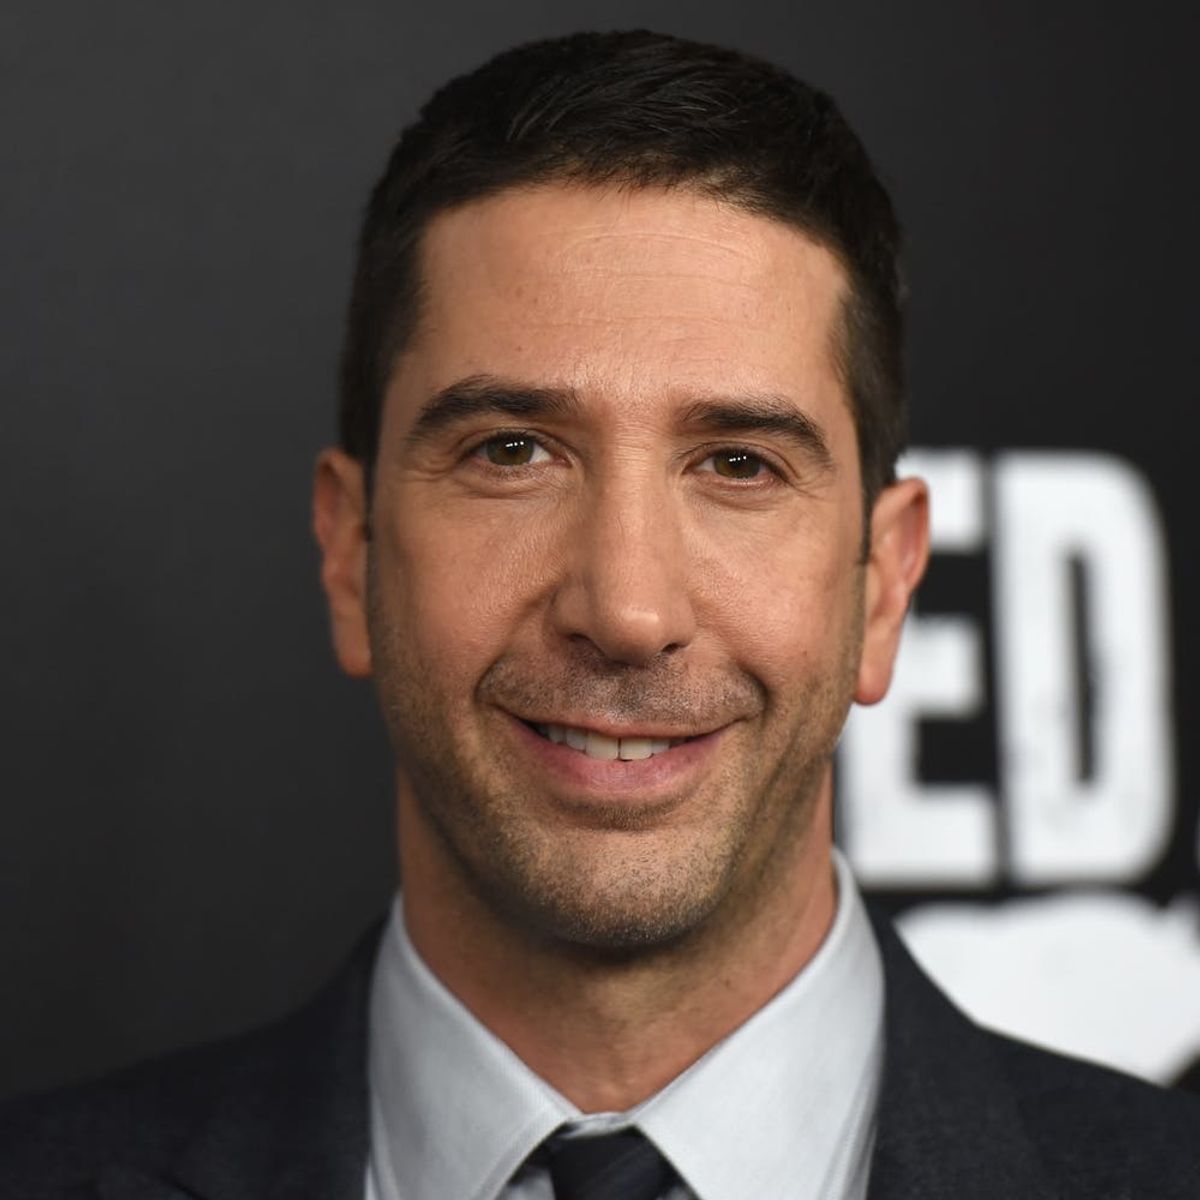 David Schwimmer Stars in the Buzziest Super Bowl Ad You’ll Never See